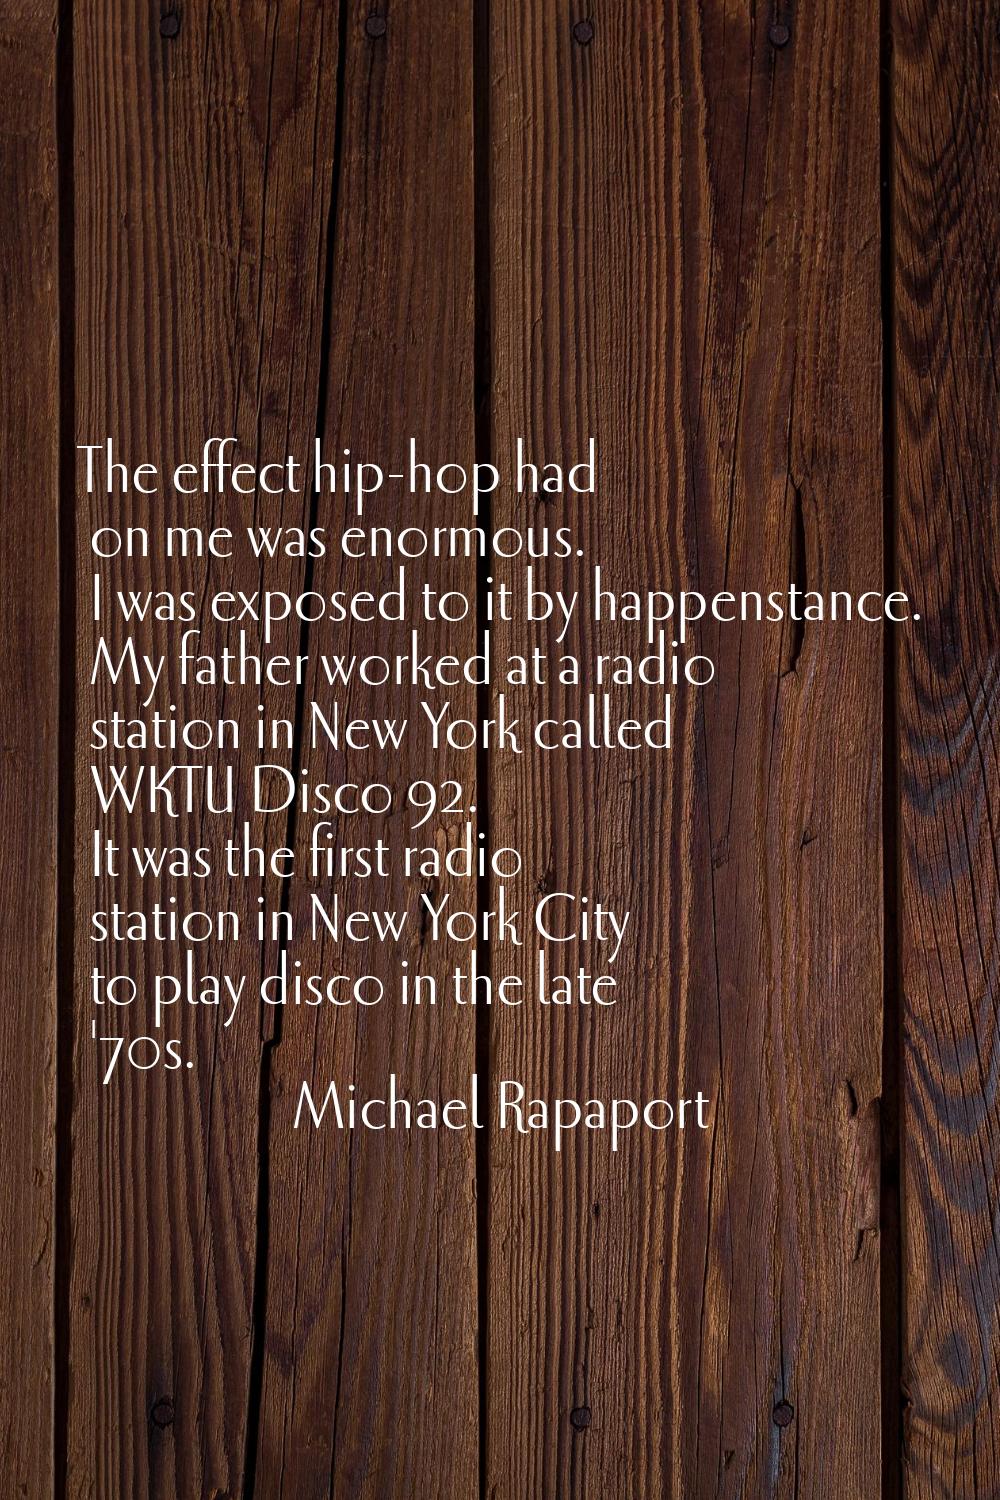 The effect hip-hop had on me was enormous. I was exposed to it by happenstance. My father worked at